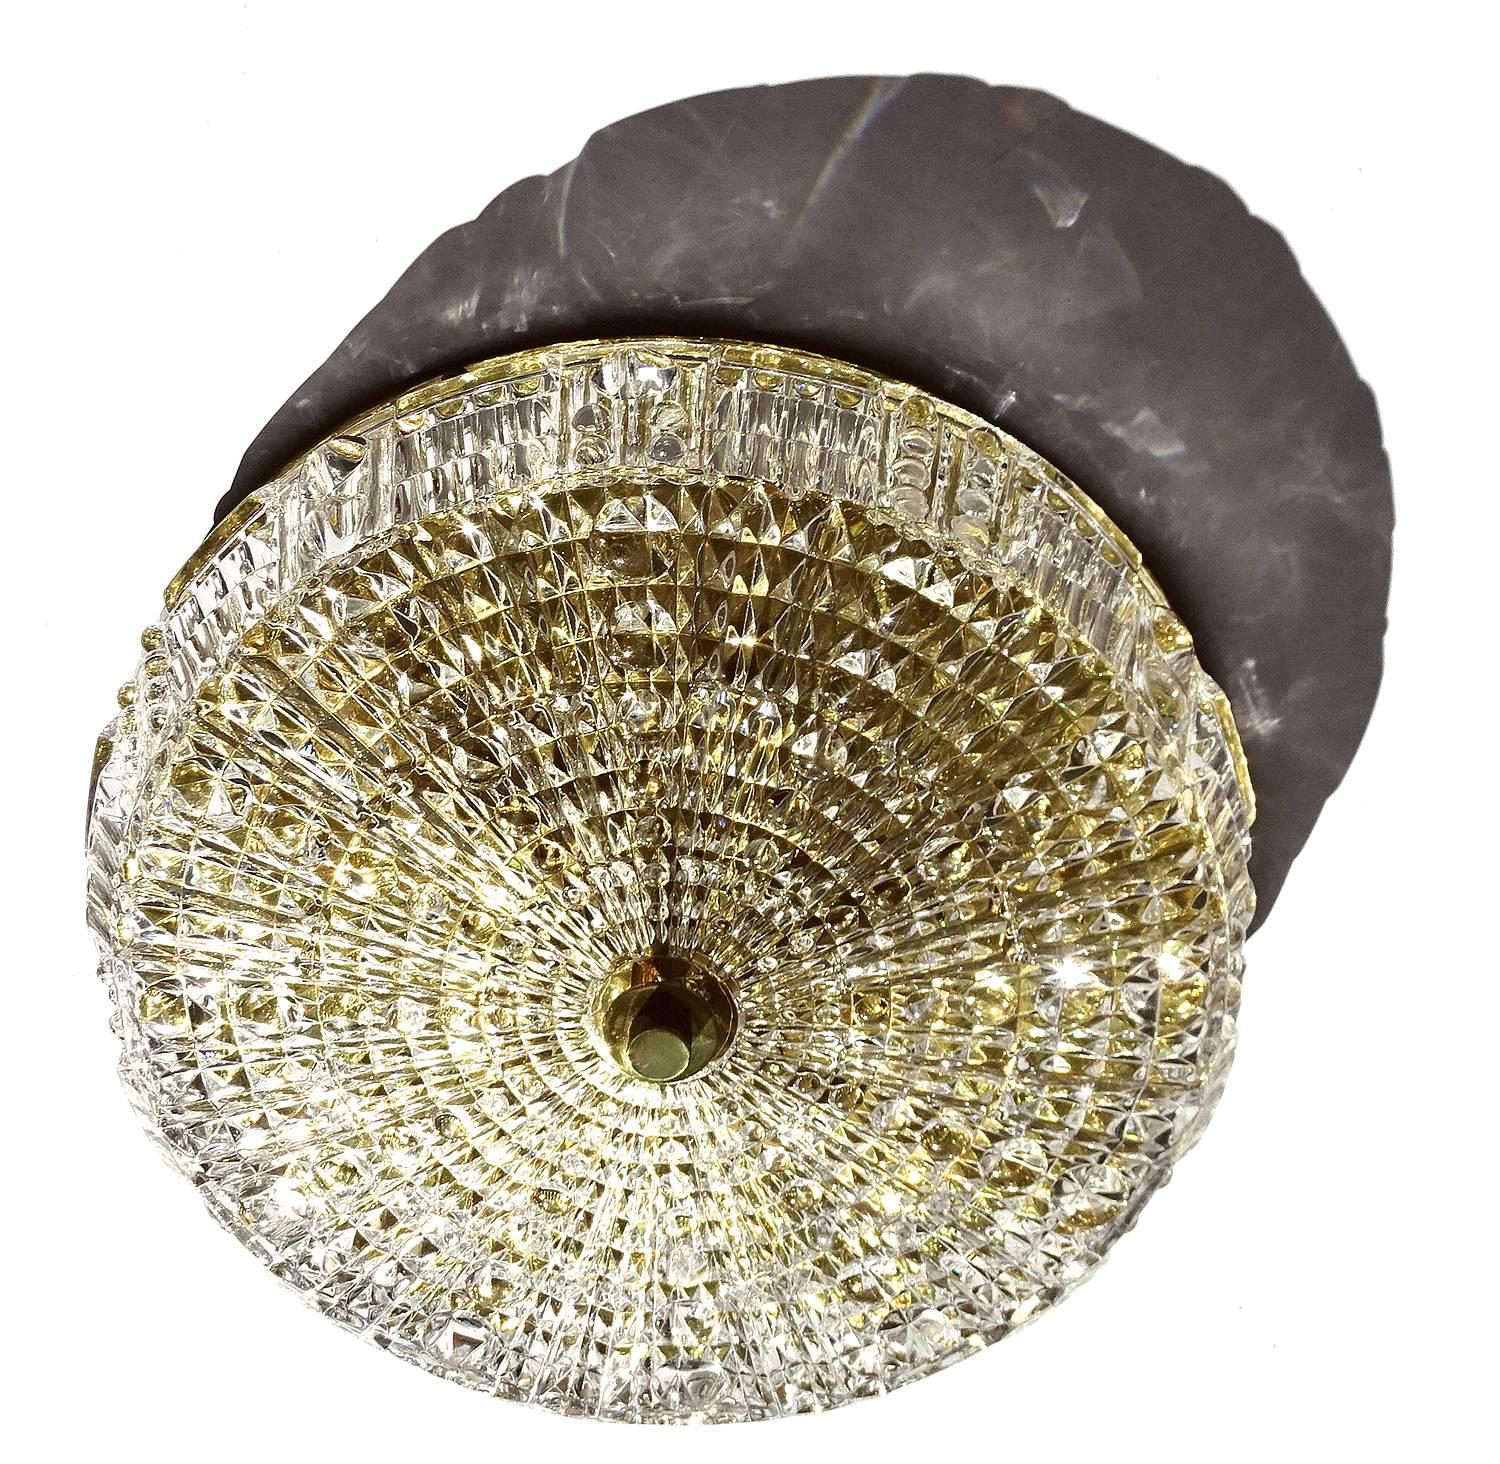 Orrefors Crystal Flush Mount Light by Carl Fagerlund,  polished brass base
4.72 in.H / 12 cmH
Diameter
14.96 in. (38 cm)
Five candelabra bulbs, 40 watts each-

With the 1960s came the accentuated use of glass elements and vintage Italian lights